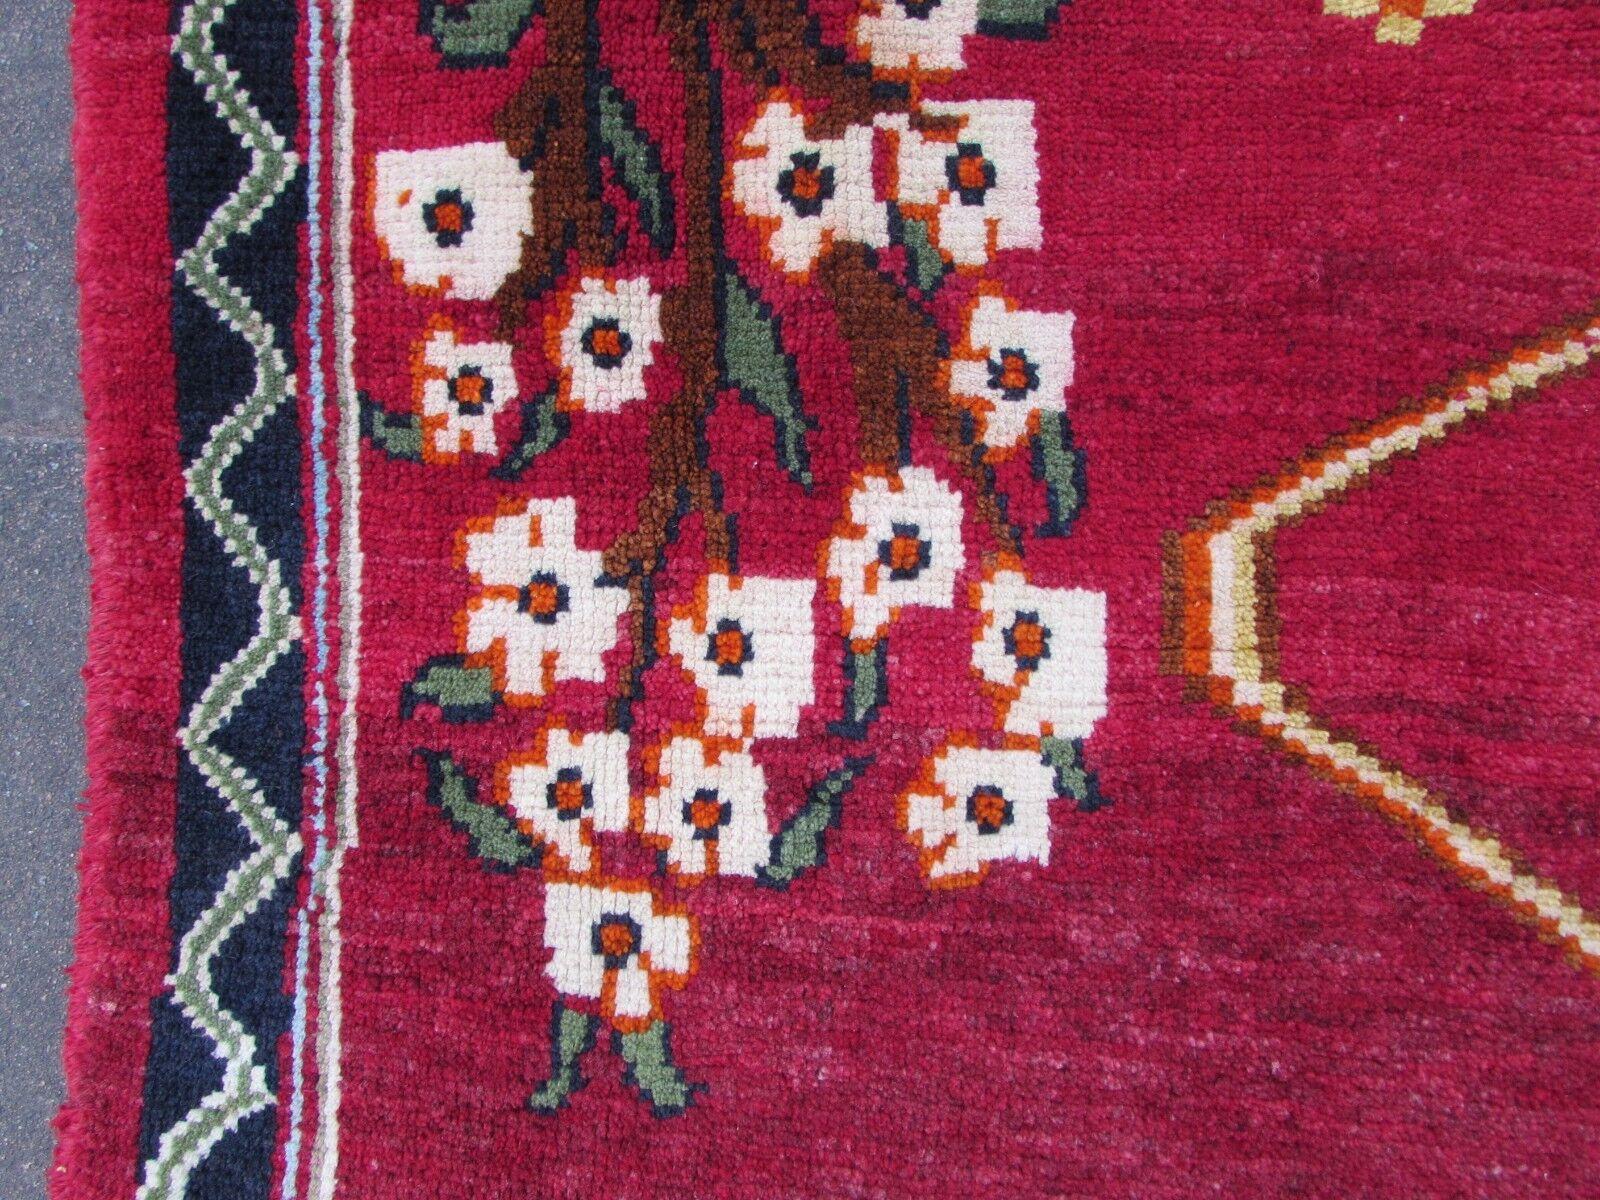 Late 20th Century Handmade Vintage Persian Style Gabbeh Red Rug 4.1' x 5.3', 1970s, 1Q60 For Sale